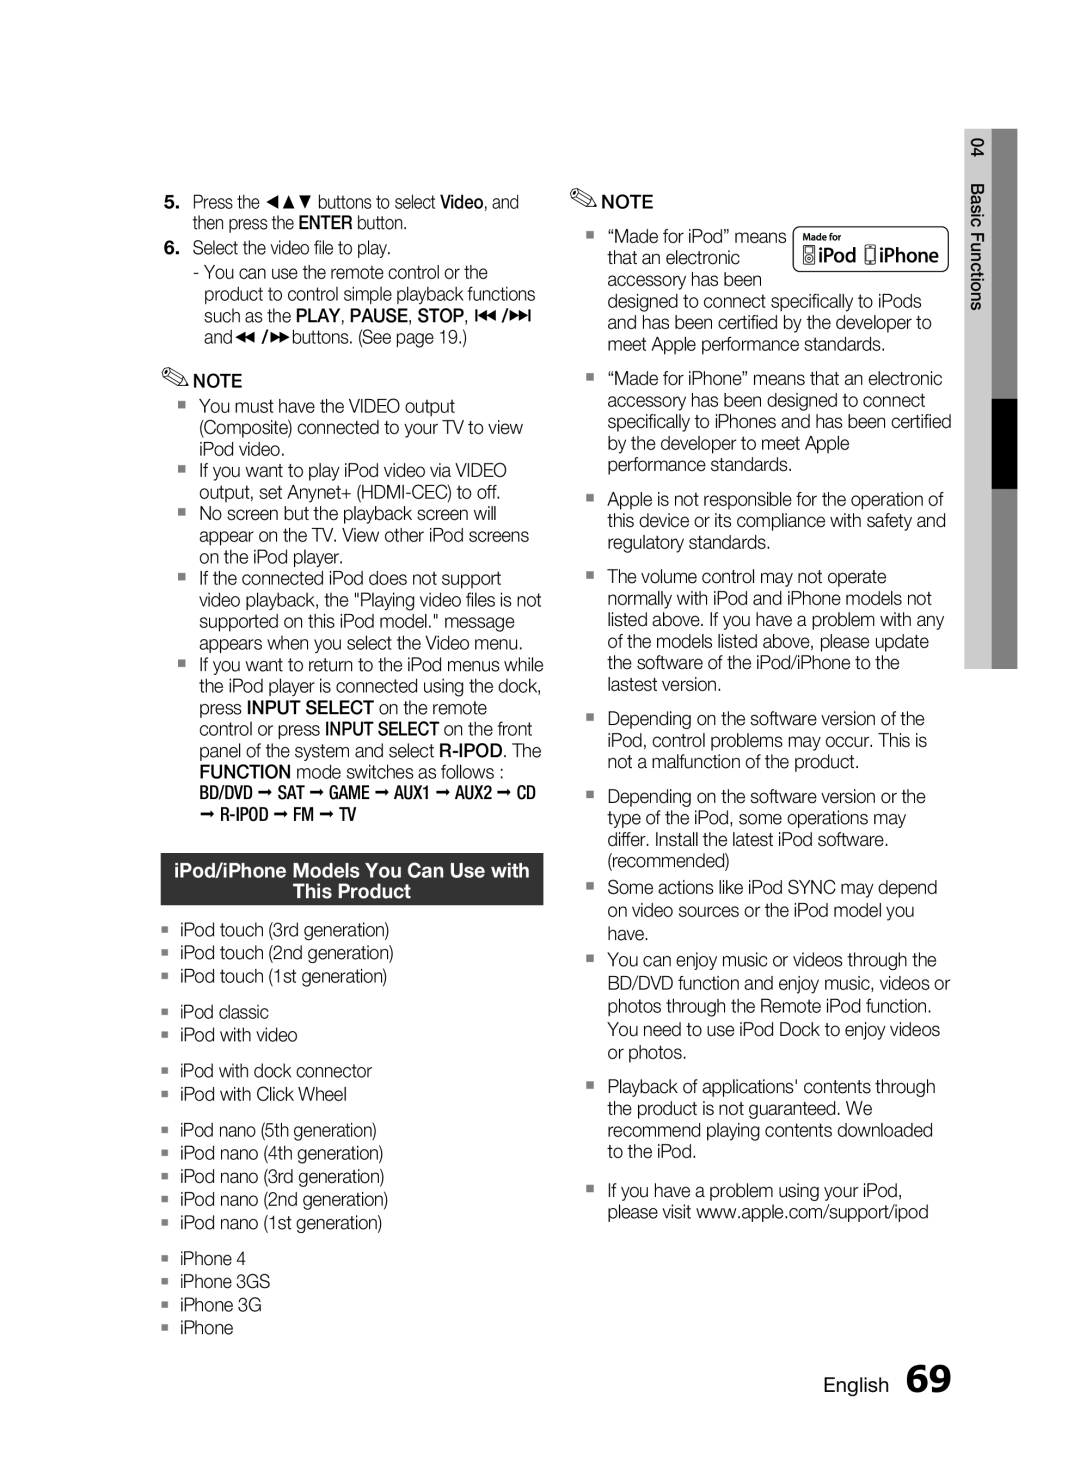 Samsung HW-D7000 user manual iPod/iPhone Models You Can Use with This Product 